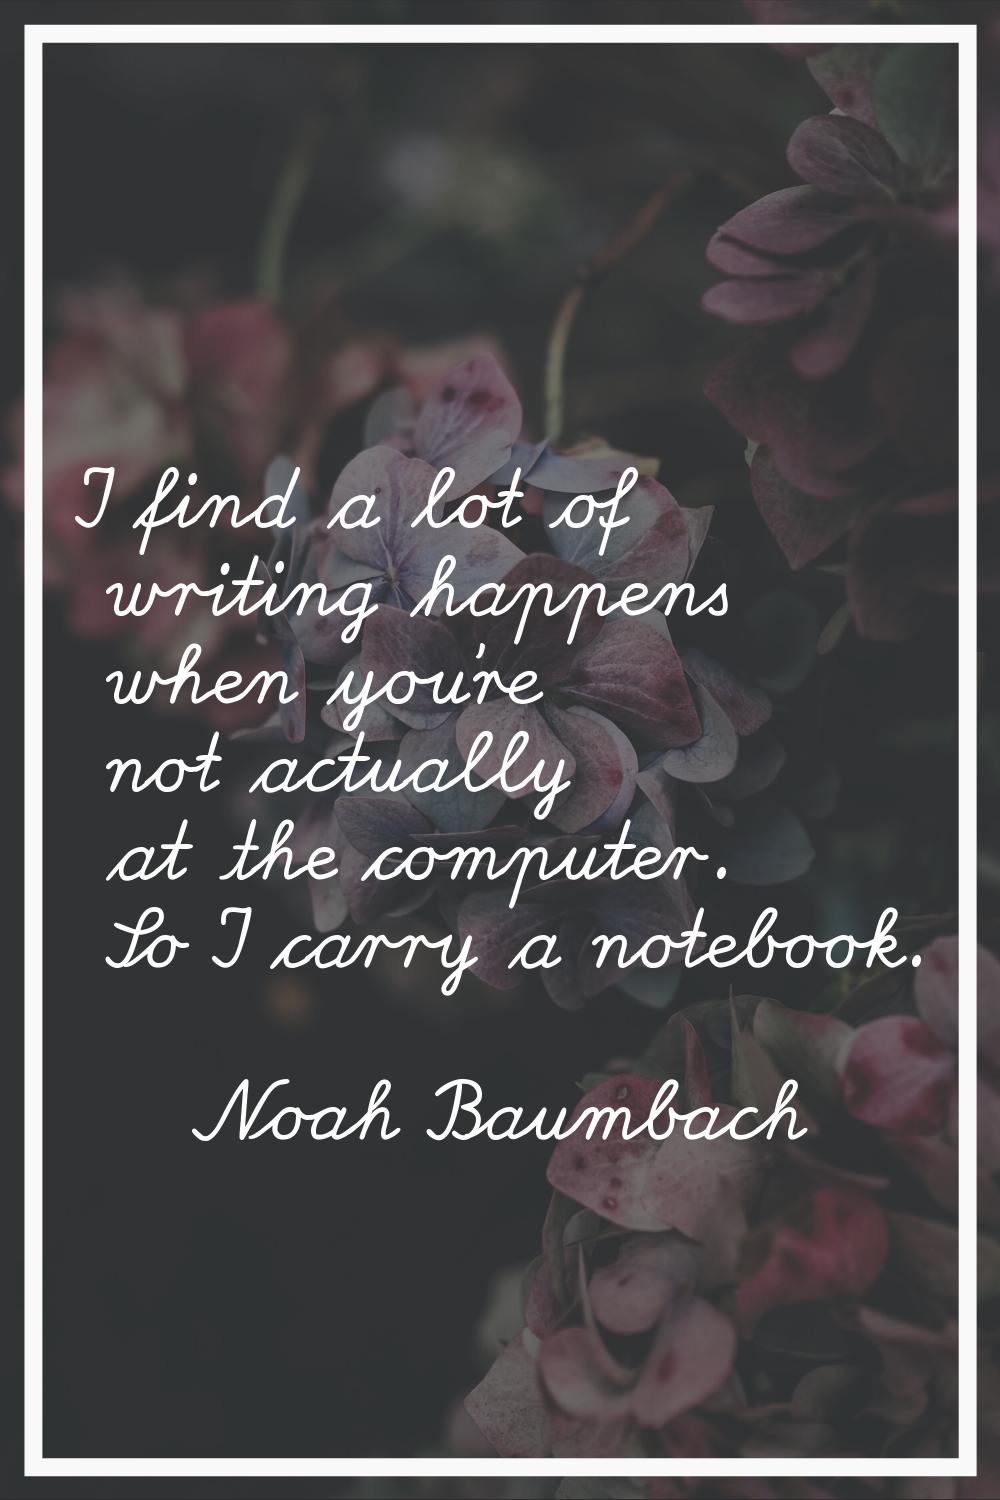 I find a lot of writing happens when you're not actually at the computer. So I carry a notebook.